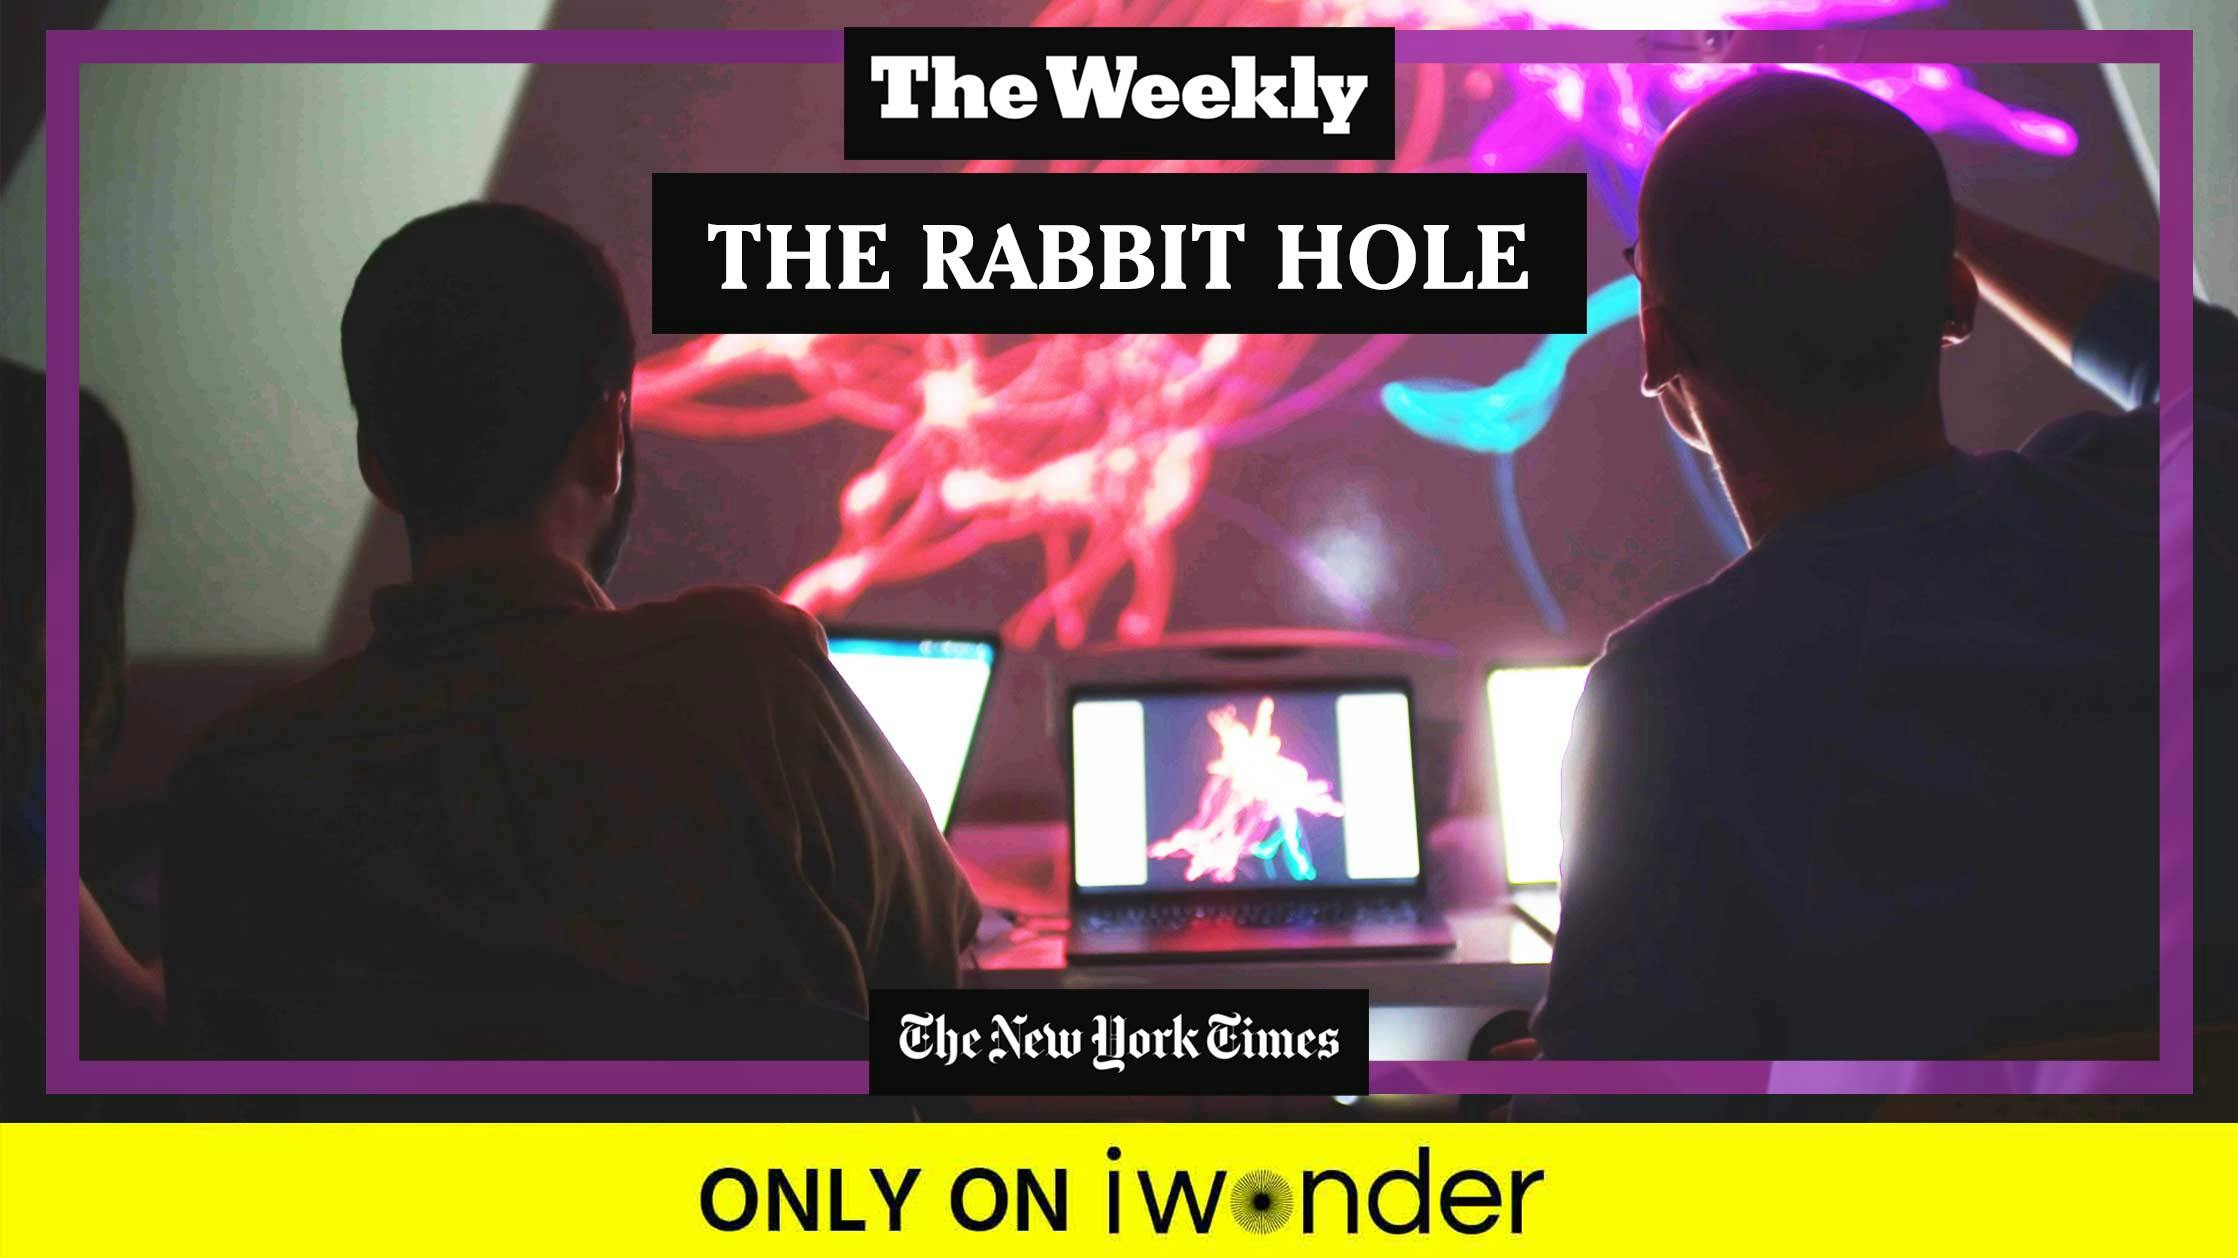 The Weekly: The Rabbit Hole